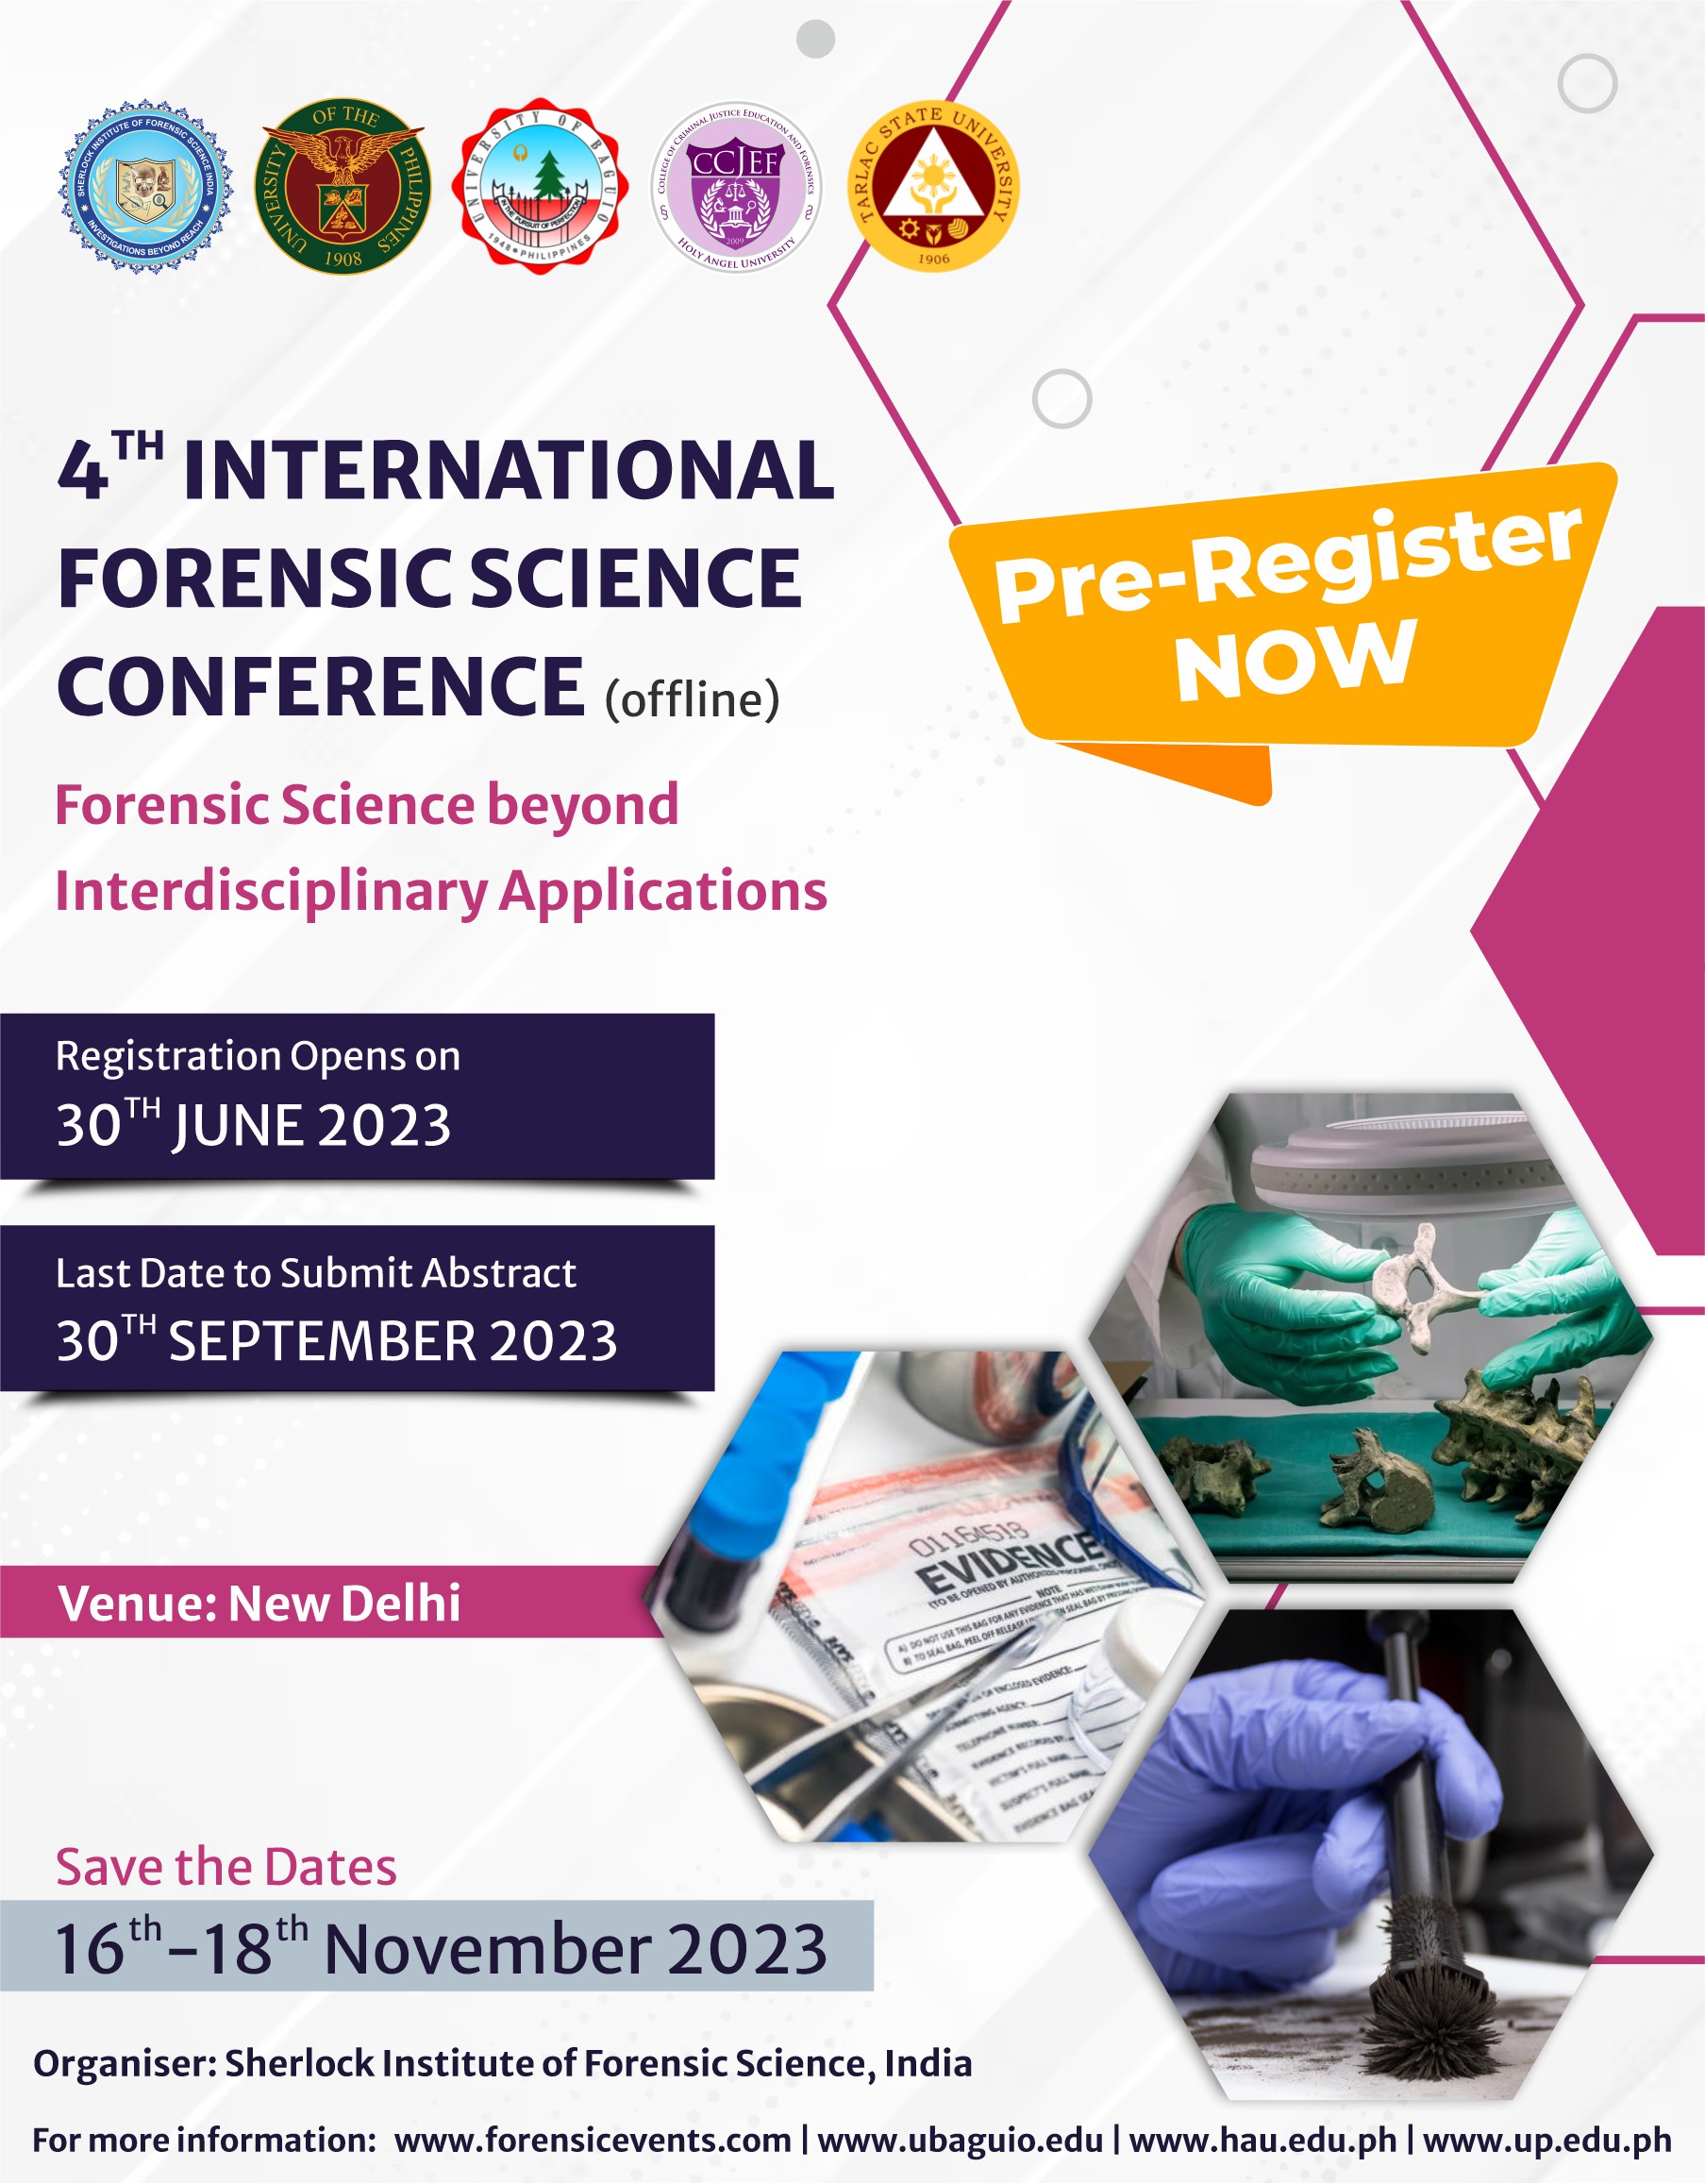 4th International Forensic Science Conference Offline